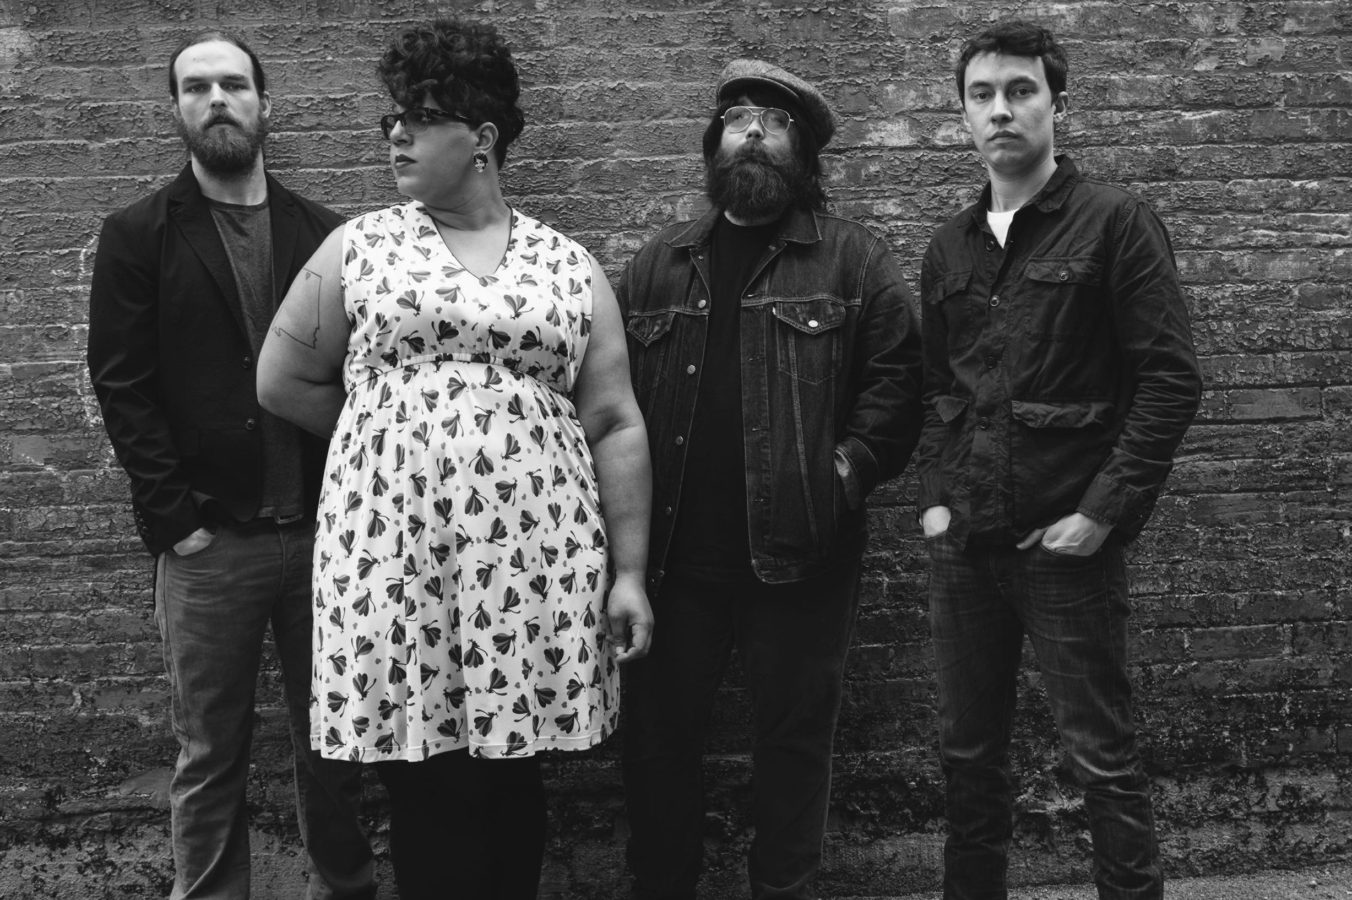 Ben & Jerry’s Concerts on the Green: Alabama Shakes